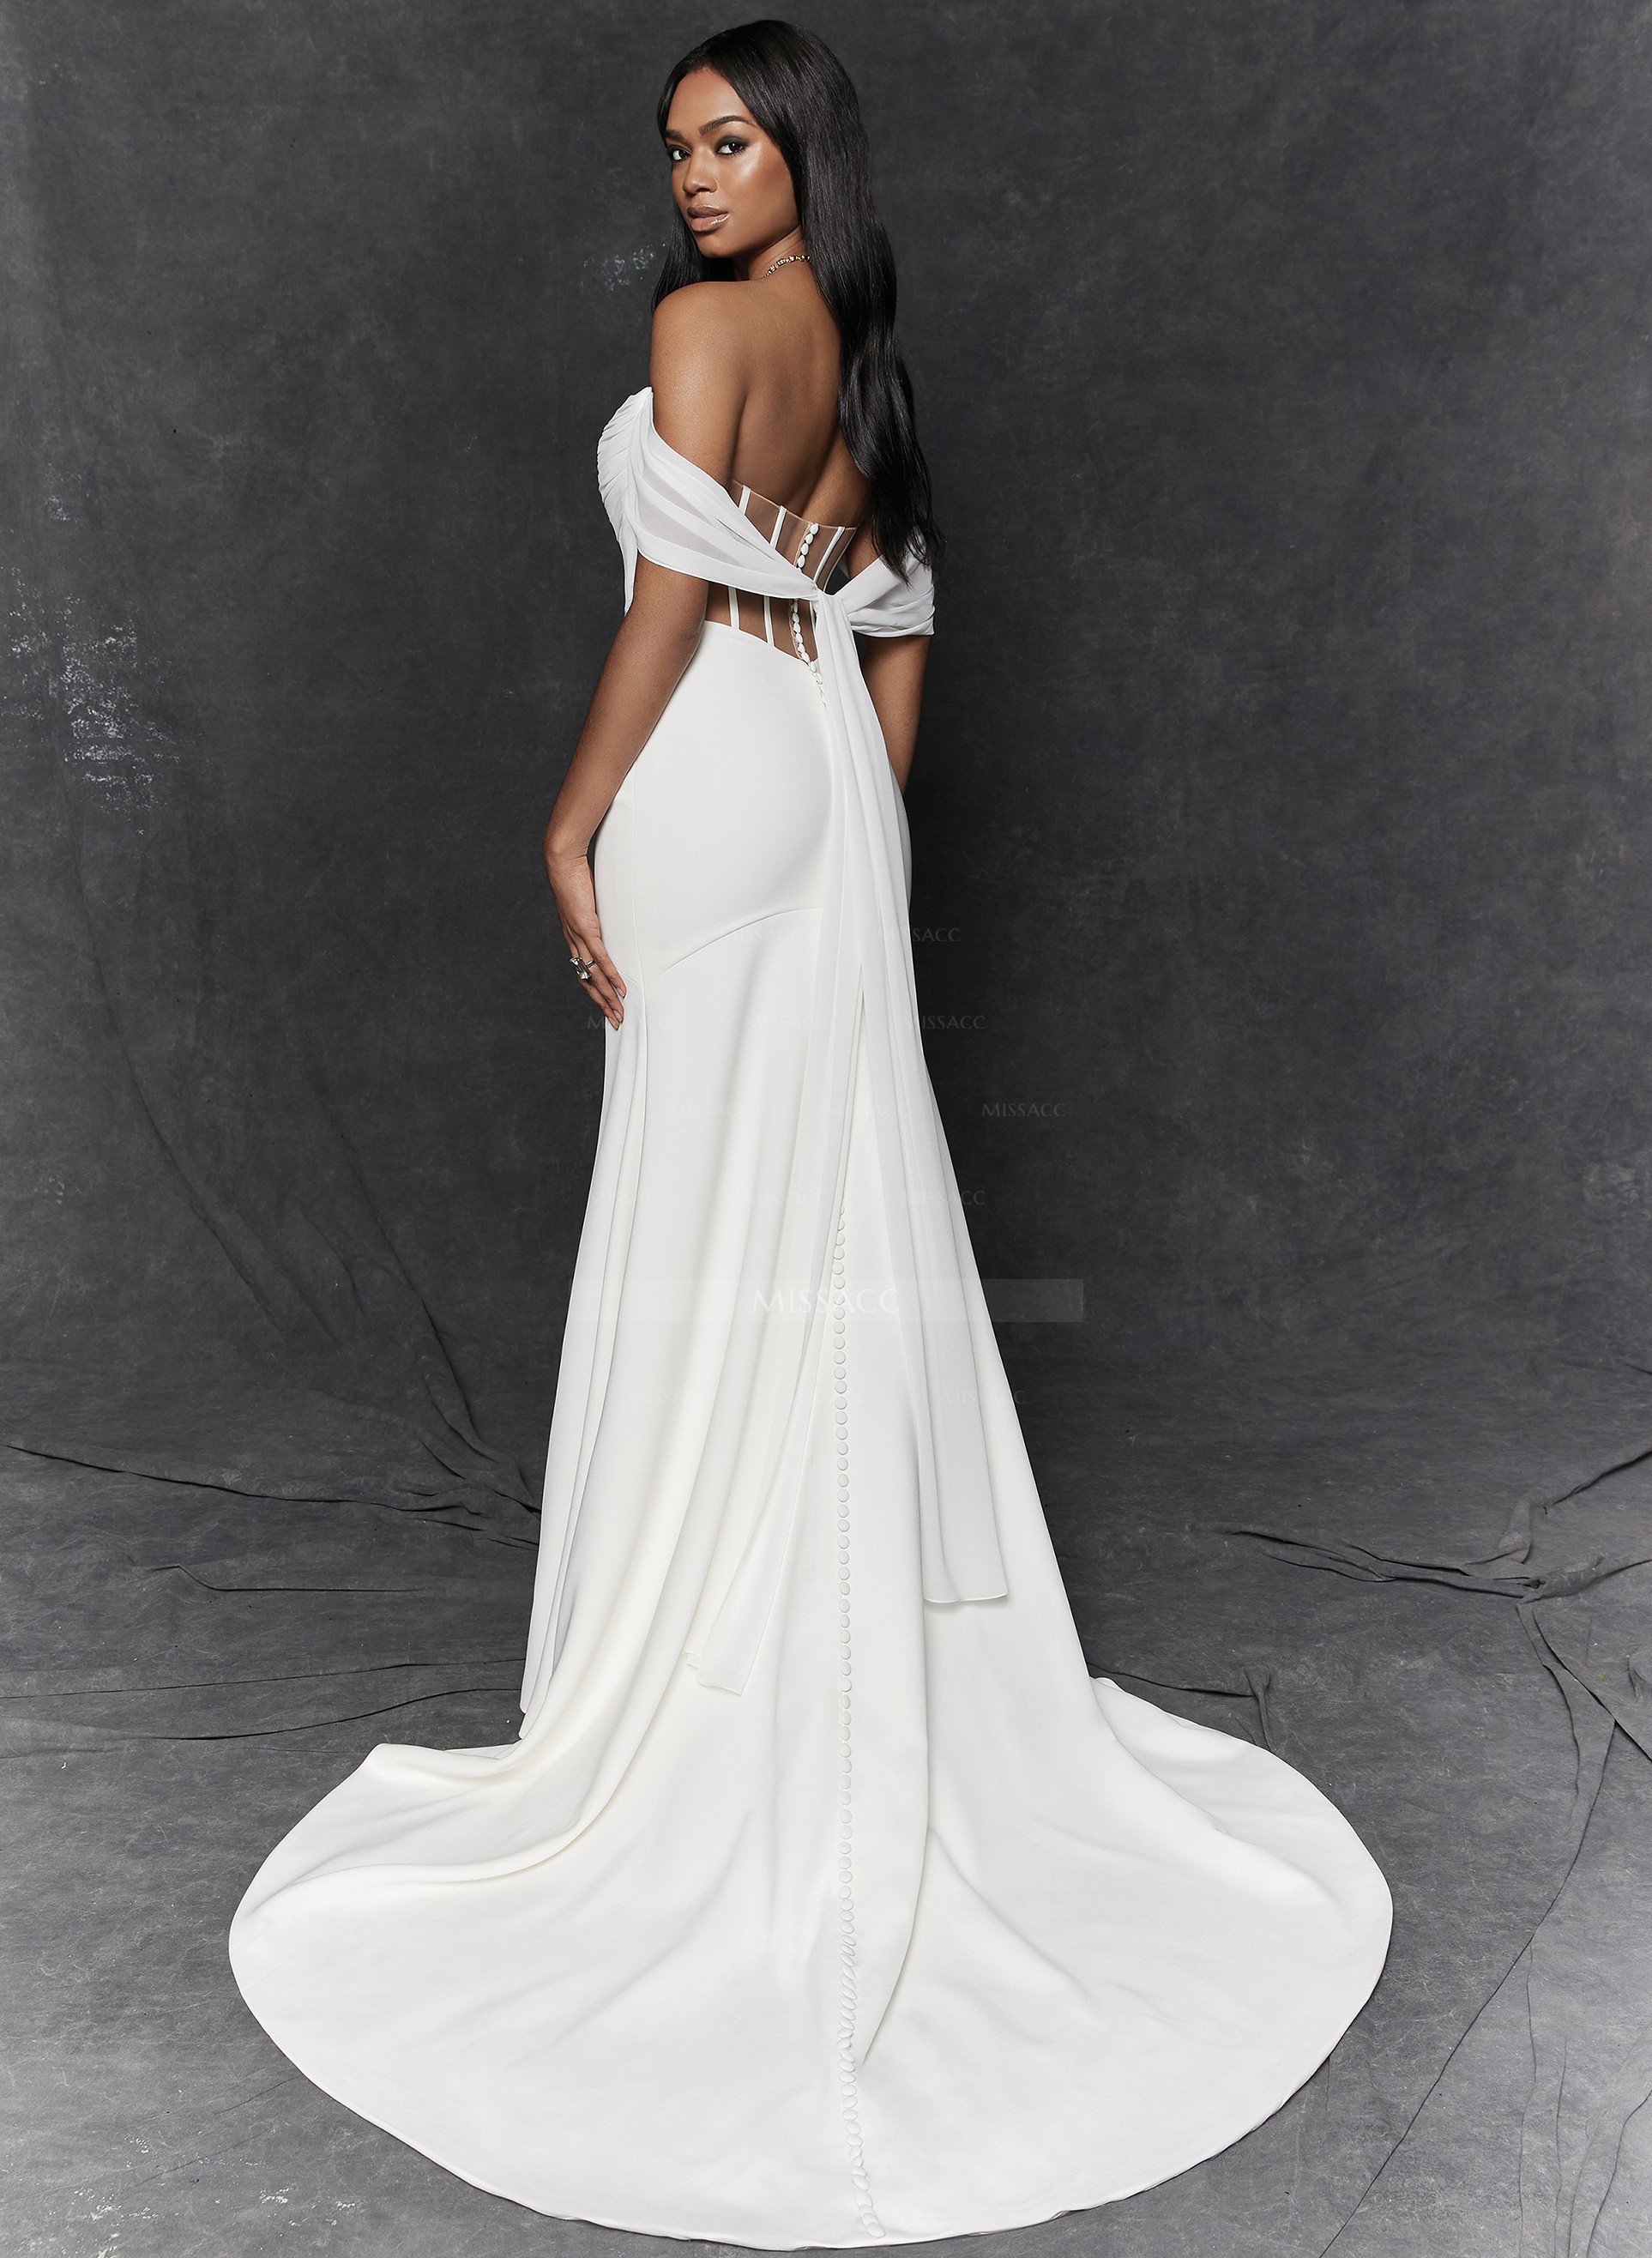 Off-the-Shoulder Trumpet/Mermaid Wedding Dresses With Ruffle 